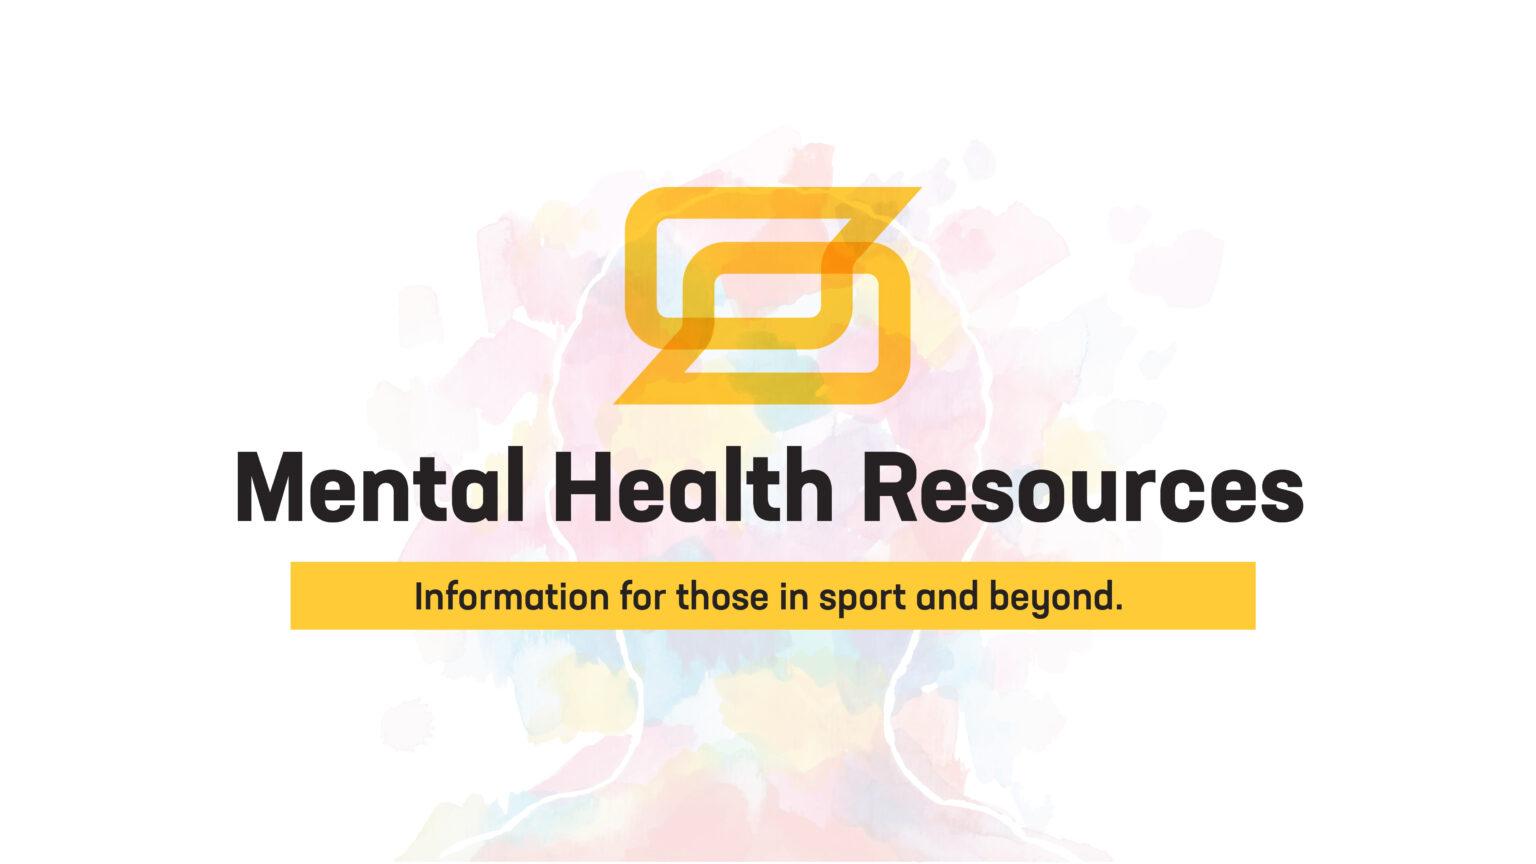 Mental health resources: information for those in sport and beyond